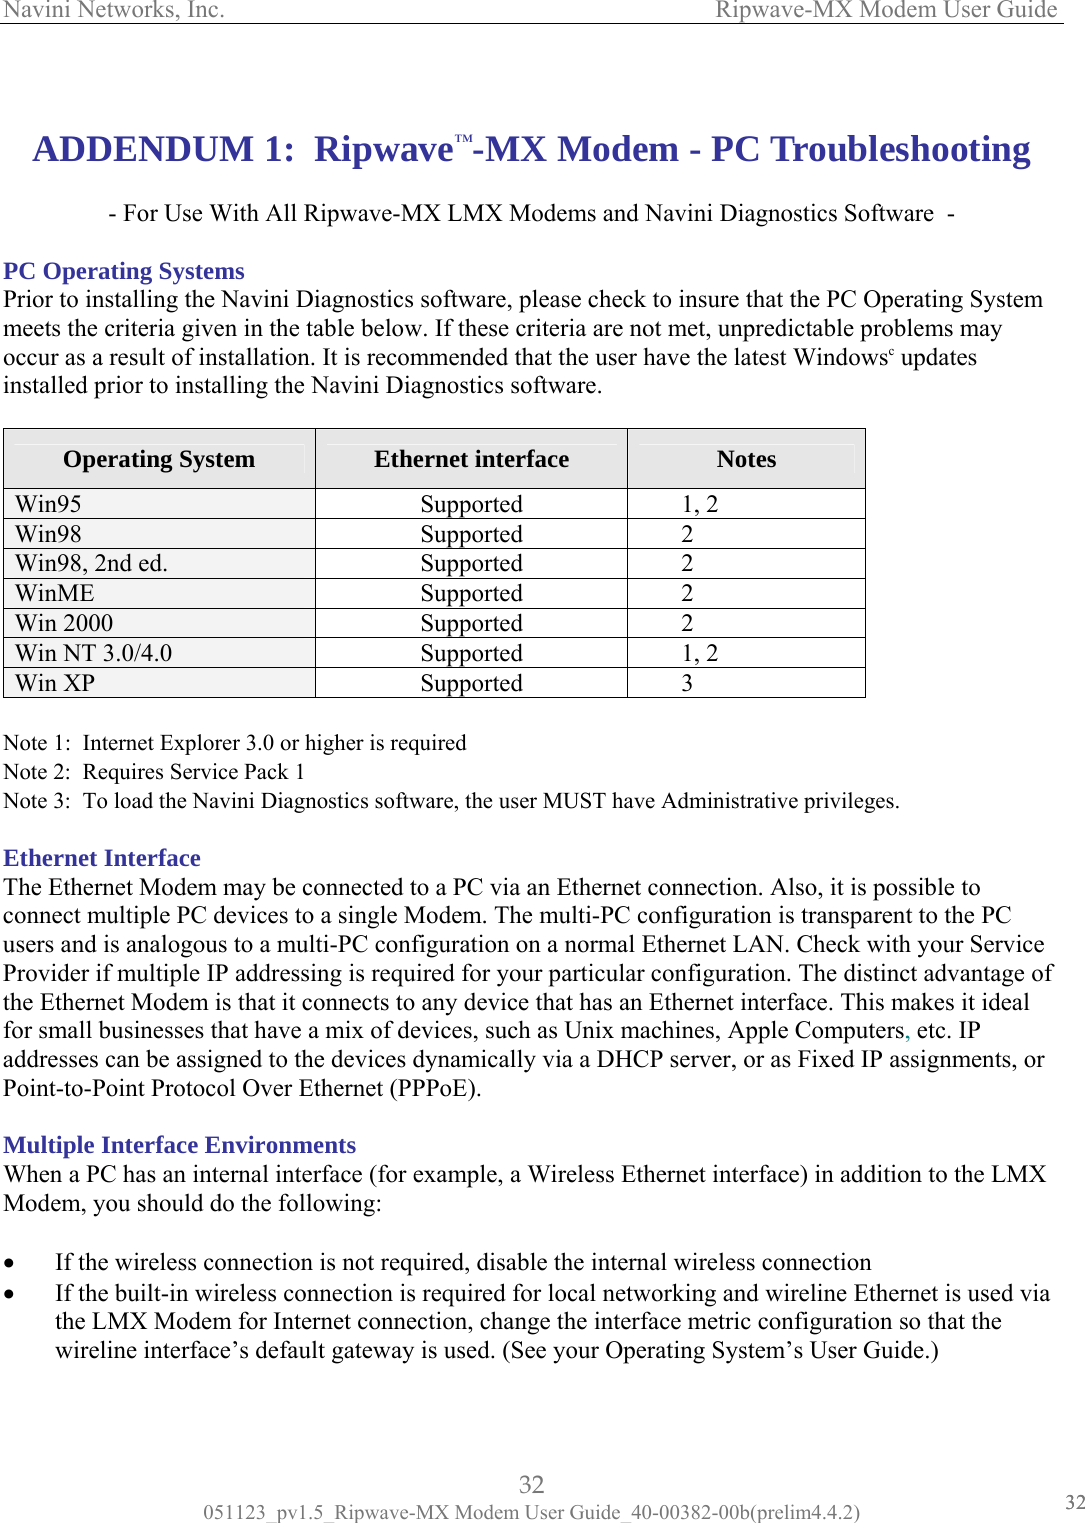 Navini Networks, Inc.                   Ripwave-MX Modem User Guide   ADDENDUM 1:  R Troubleshooting - For Use With AllC Operating Systems rior to installing the Navini  System eets the criteria given in the tab ay ccur as a result of installation. It  stalled prior to installing the Naipwave™-MX Modem - PC   Ripwave-MX LMX Modems and Navini Diagnostics Software  -  PP Diagnostics software, please check to insure that the PC Operating le below. If these criteria are not met, unpredictable problems m is recommended that the user have the latest Windowsmoc updatesvini Diagnostics software. in Operating System  Ethernet interface  Notes Win95  Supported 1, 2 Win98  Supported 2 Win98, 2nd ed.  Supported 2 WinME  Supported 2 Win 2000  Supported 2 Win NT 3.0/4.0  Supported 1, 2 Win XP  Supported 3  Note 1:  Internet Explorer 3.0 orote 2:  Requires Service Pack 1 ote 3:  To load the Navini Diagnos ileges. thernet Interface he Ethernet Modem may be con  onnect multiple PC devices to a  PC sers and is analogous to a multi- thernet LAN. Check with your Service rovider if multiple IP addressing is required for your particular configuration. The distinct advantage of e Ethernet Modem is that it s it ideal r small businesses that have a m  ddresses can be assigned to the d ents, or oint-to-Point Protocol Over Eth E). ultiple Interface Environmhen a PC has an internal in  LMX odem, you should do the fo If the wireless connectio If the built-in wireless connection is required for local networking and wireline Ethernet is used via the LMX Modem for Int hat the wireline interface’s defa  higher is required tics software, the user MUST have Administrative privNN ET nected to a PC via an Ethernet connection. Also, it is possible tosingle Modem. The multi-PC configuration is transparent to the PC configuration on a normal EcuPth  connects to any device that has an Ethernet interface. This makeix of devices, such as Unix machines, Apple Computers, etc. IPevices dynamically via a DHCP server, or as Fixed IP assignmernet (PPPofoaP M ents terface (for example, a Wireless Ethernet interface) in addition to thellowing: n is not required, disable the internal wireless connection  WM ••ernet connection, change the interface metric configuration so tult gateway is used. (See your Operating System’s User Guide.) 32 051123_pv1.5_Ripwave-MX Modem User Guide_40-00382-00b(prelim4.4.2) 3232